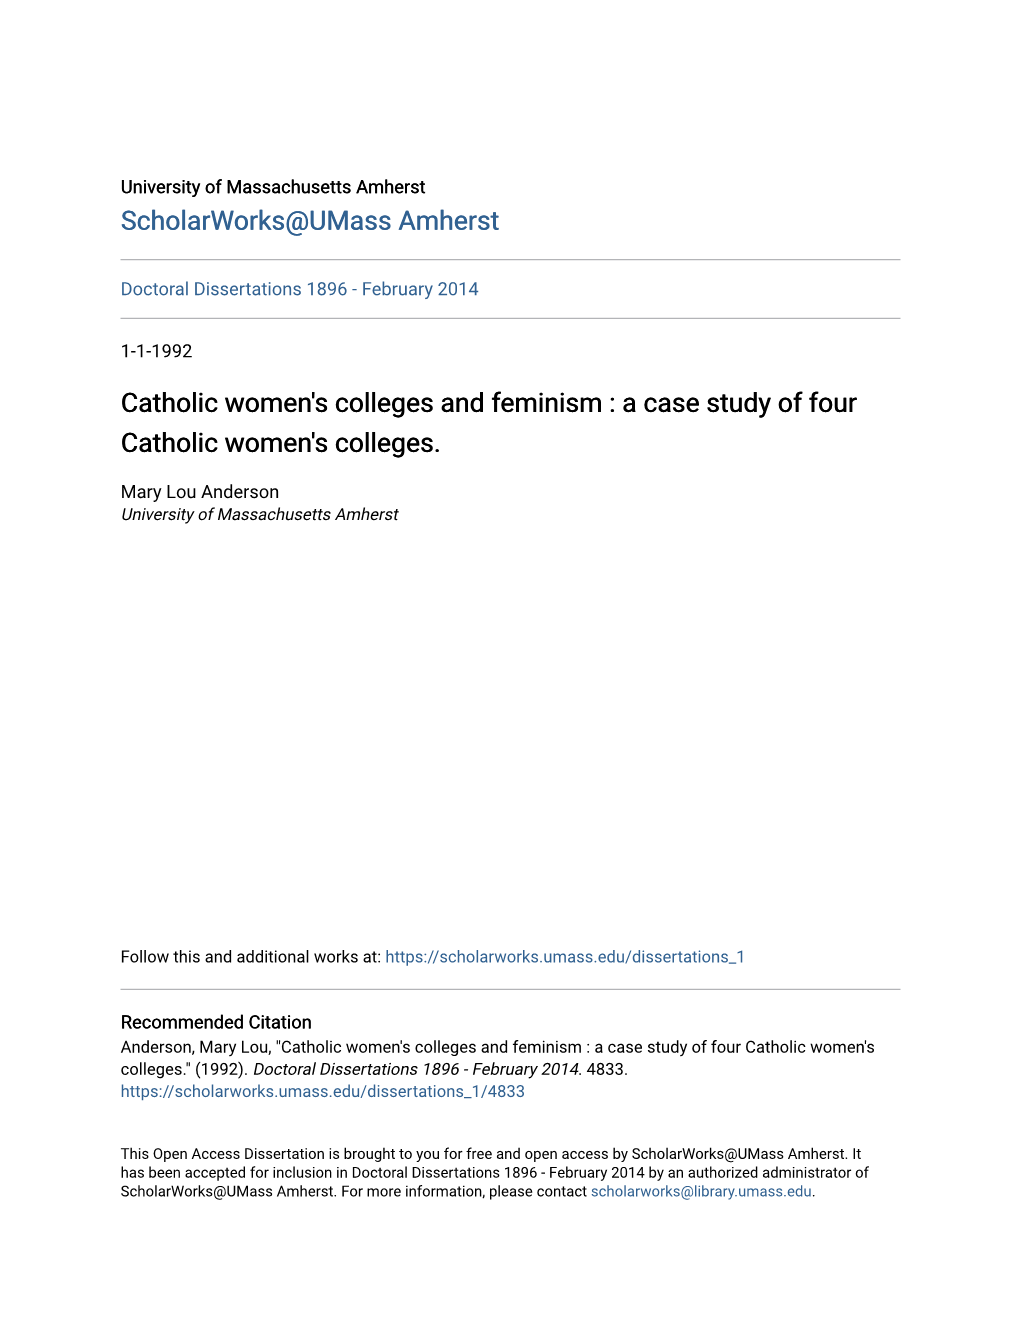 Catholic Women's Colleges and Feminism : a Case Study of Four Catholic Women's Colleges